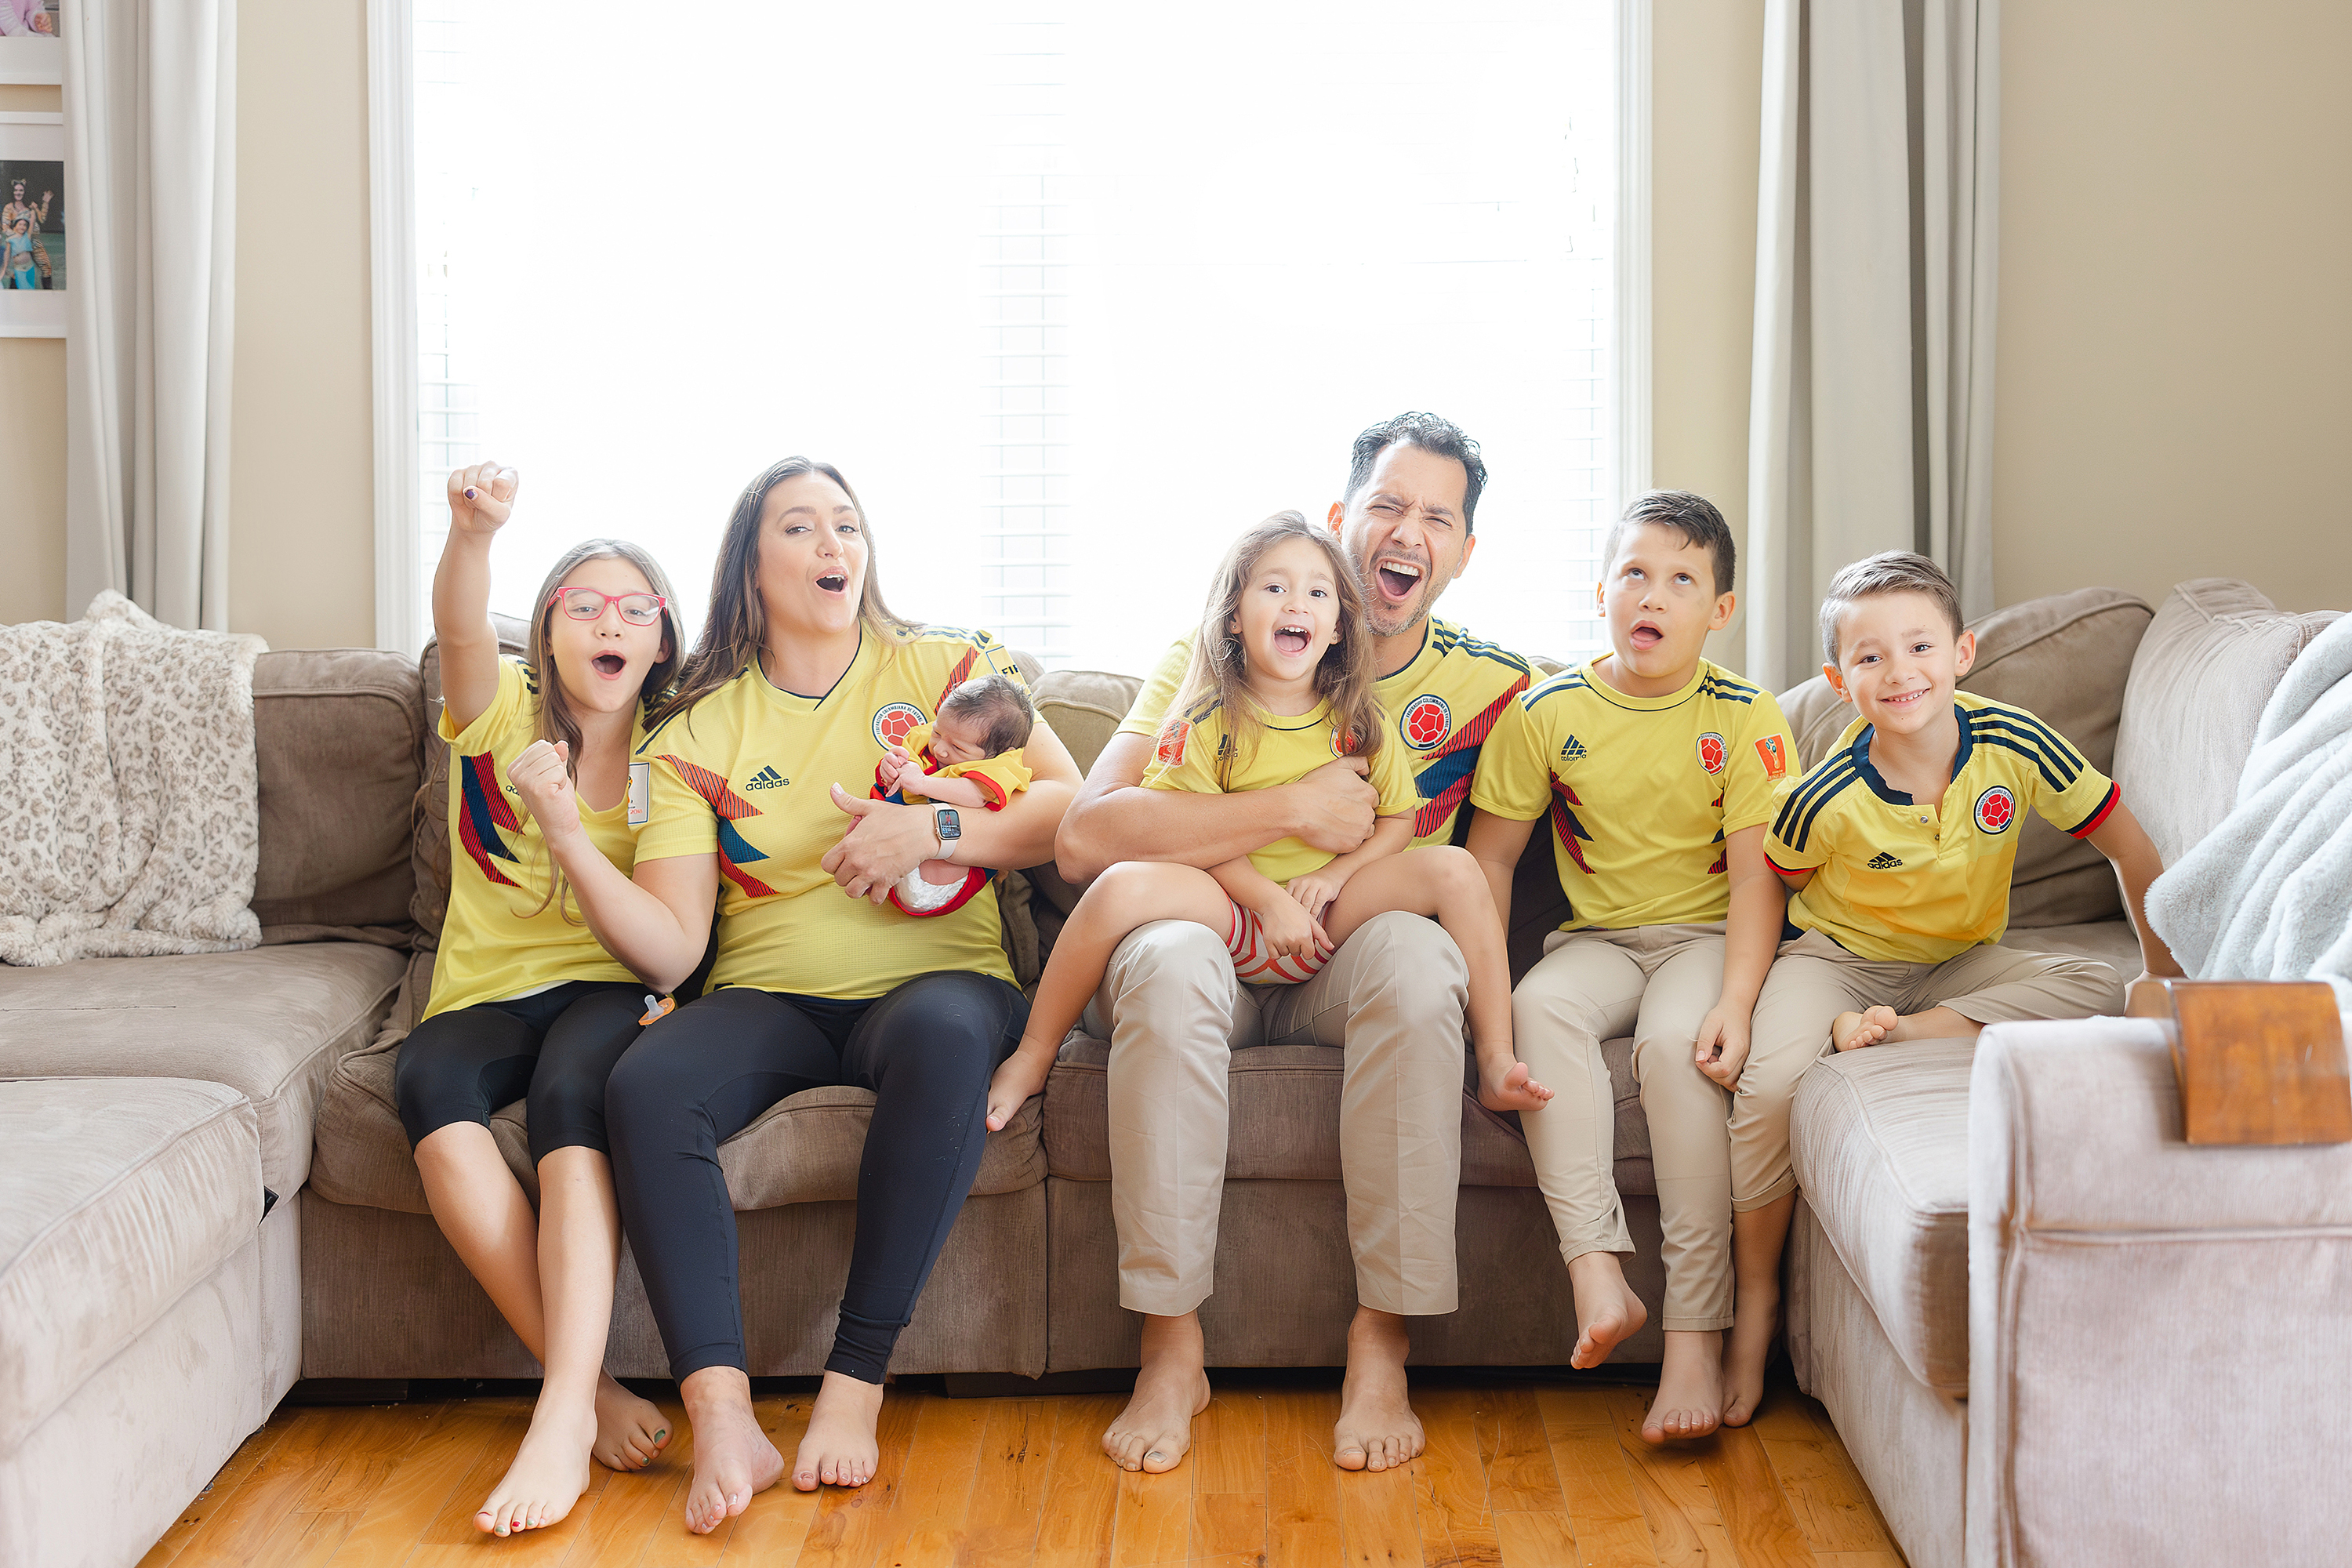 Family sitting on couch dressed in matching Colombia soccer jerseys.